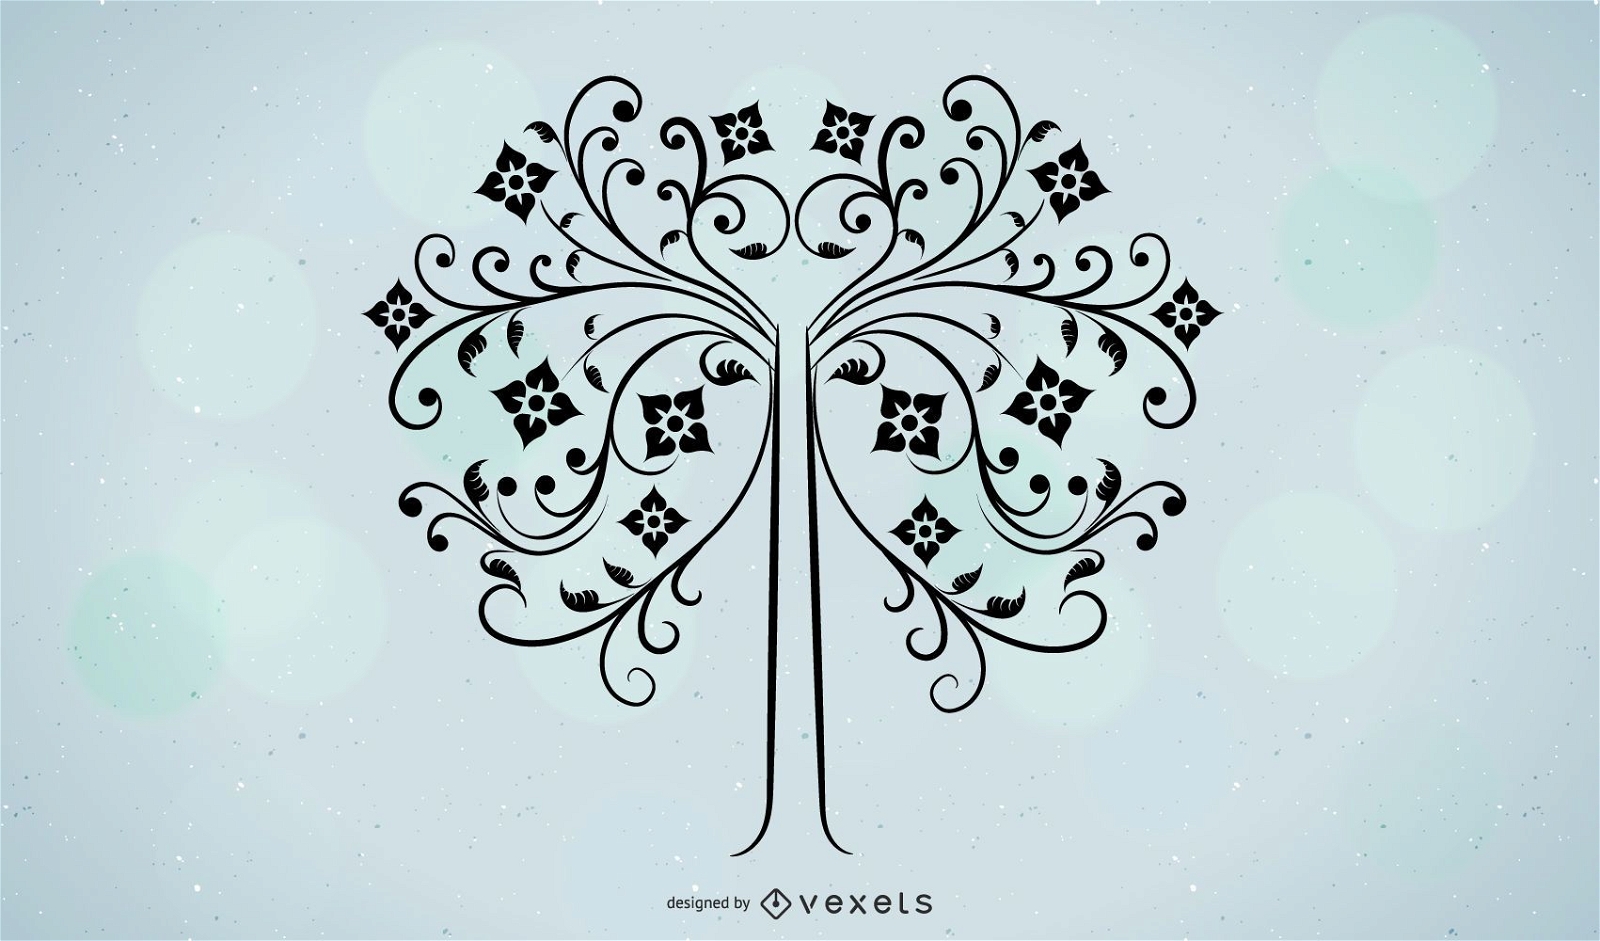 Isolated Tree With Swirls - Vector Download